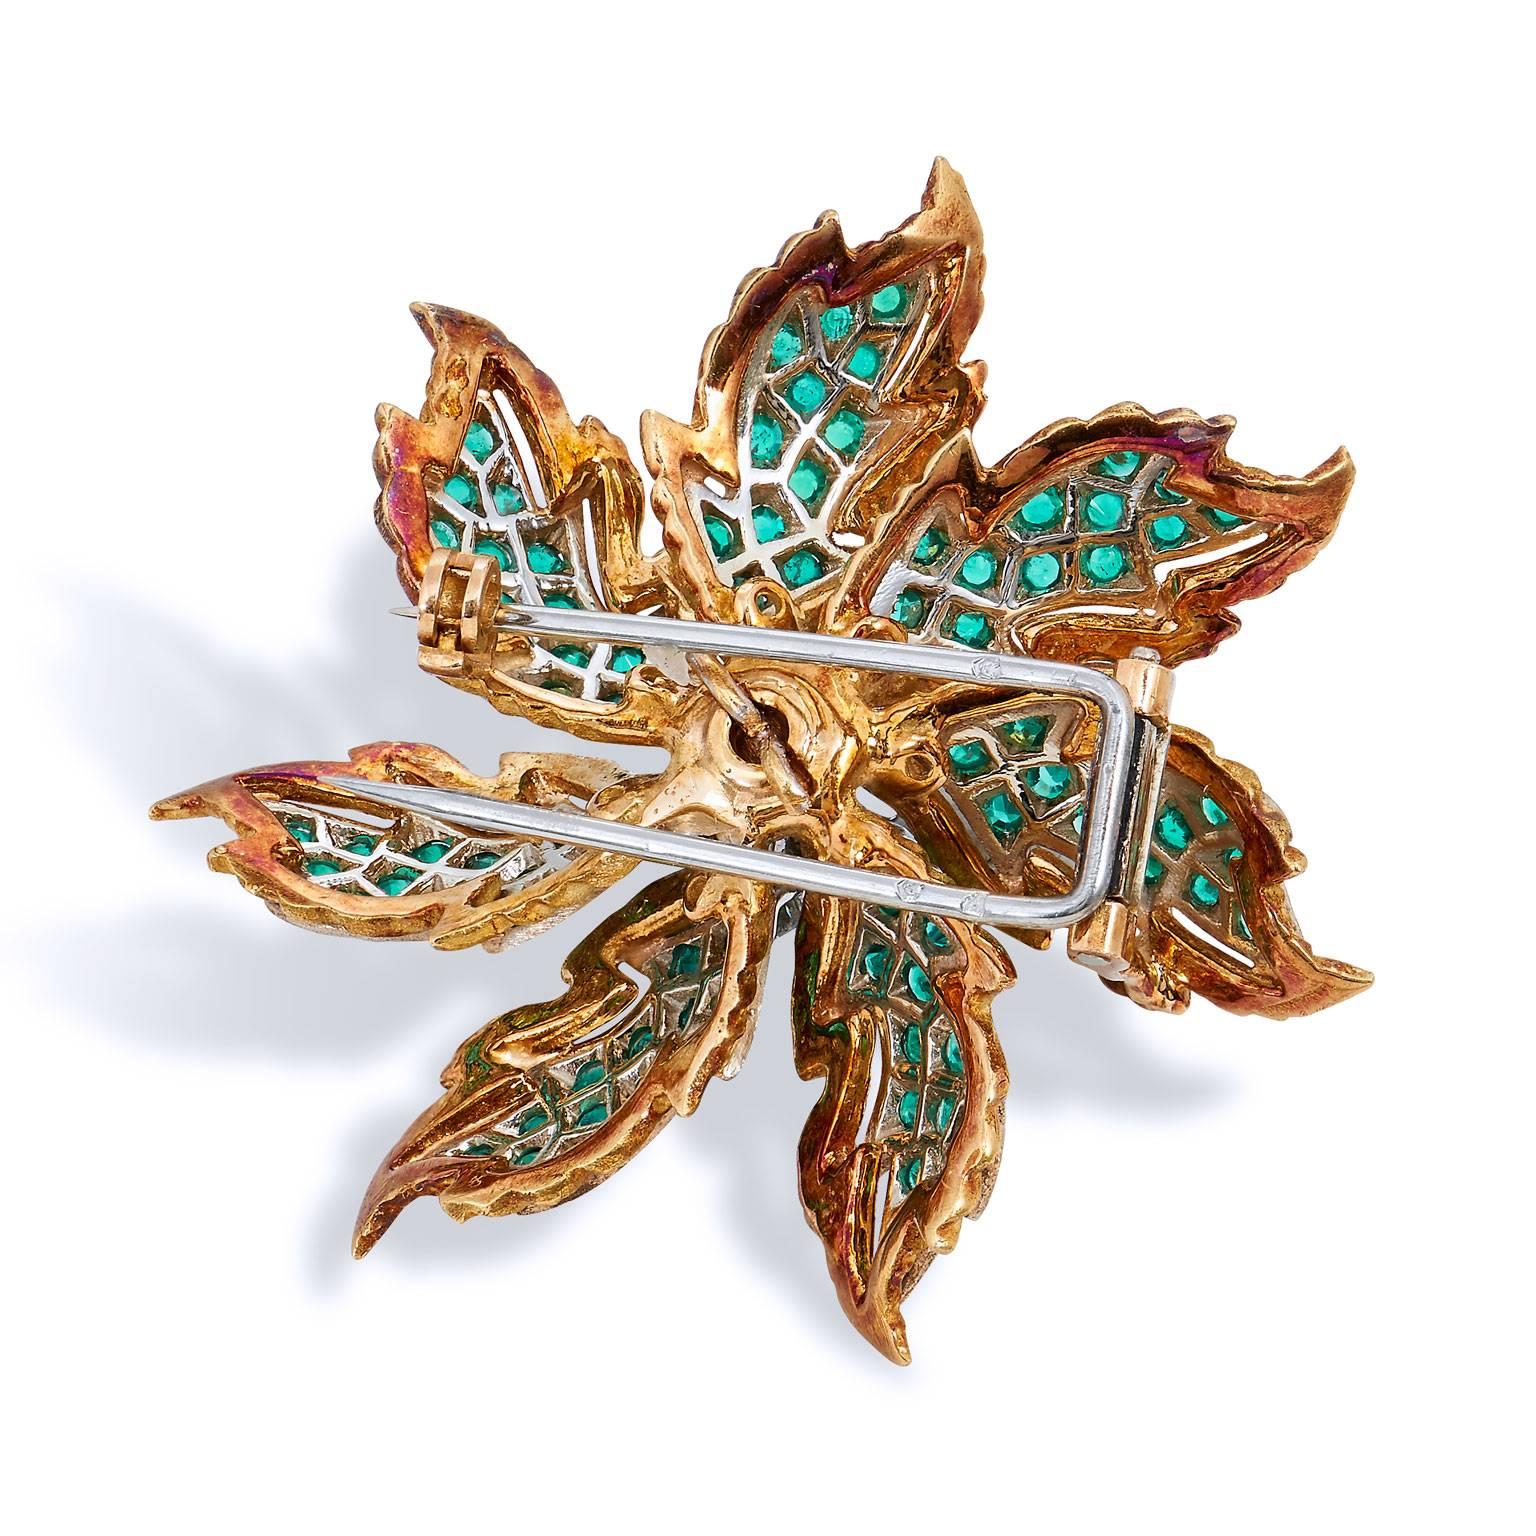 Enjoy this previously loved 18 karat white and yellow gold, emerald and diamond brooch. This exquisite French made brooch features eighty-four pieces of emerald, resulting in a total weight of 1.50 carat, and 0.75 carat of diamond in color H and